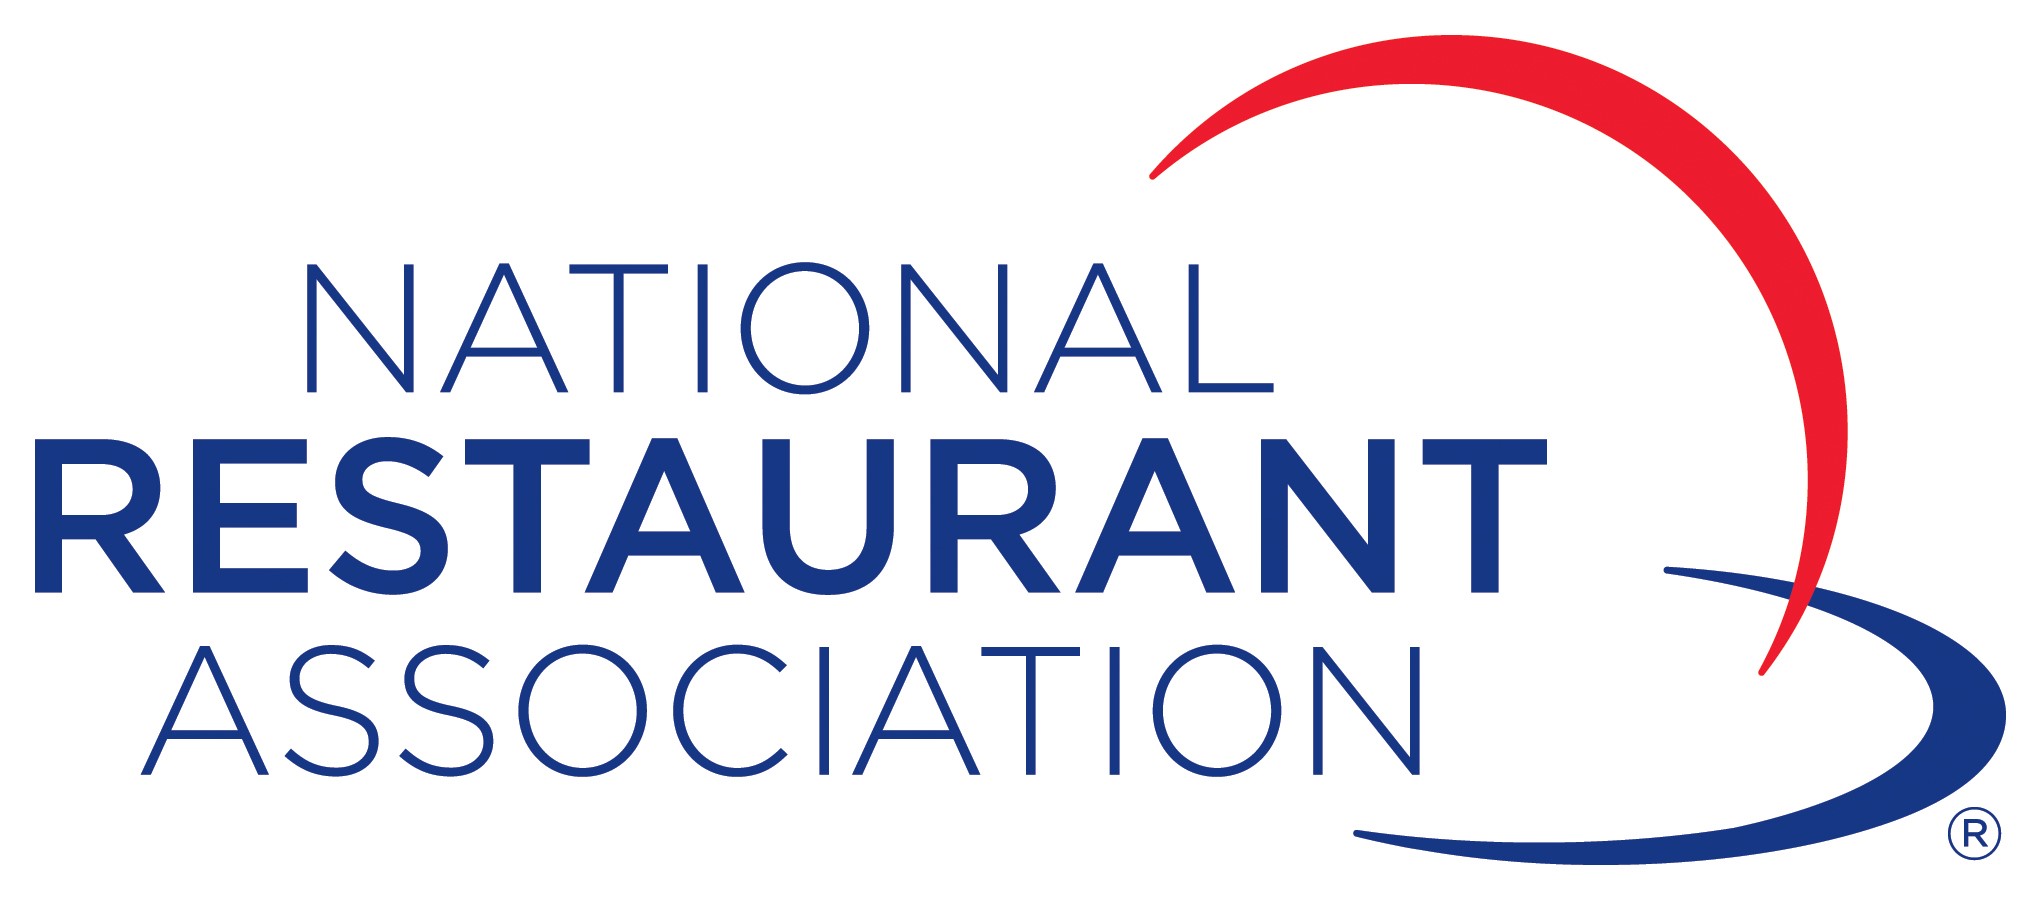 The National Restaurant Association is the leading association for the restaurant industry, which is composed of 1 million restaurant and foodservice outlets and a workforce of 14 million employees.